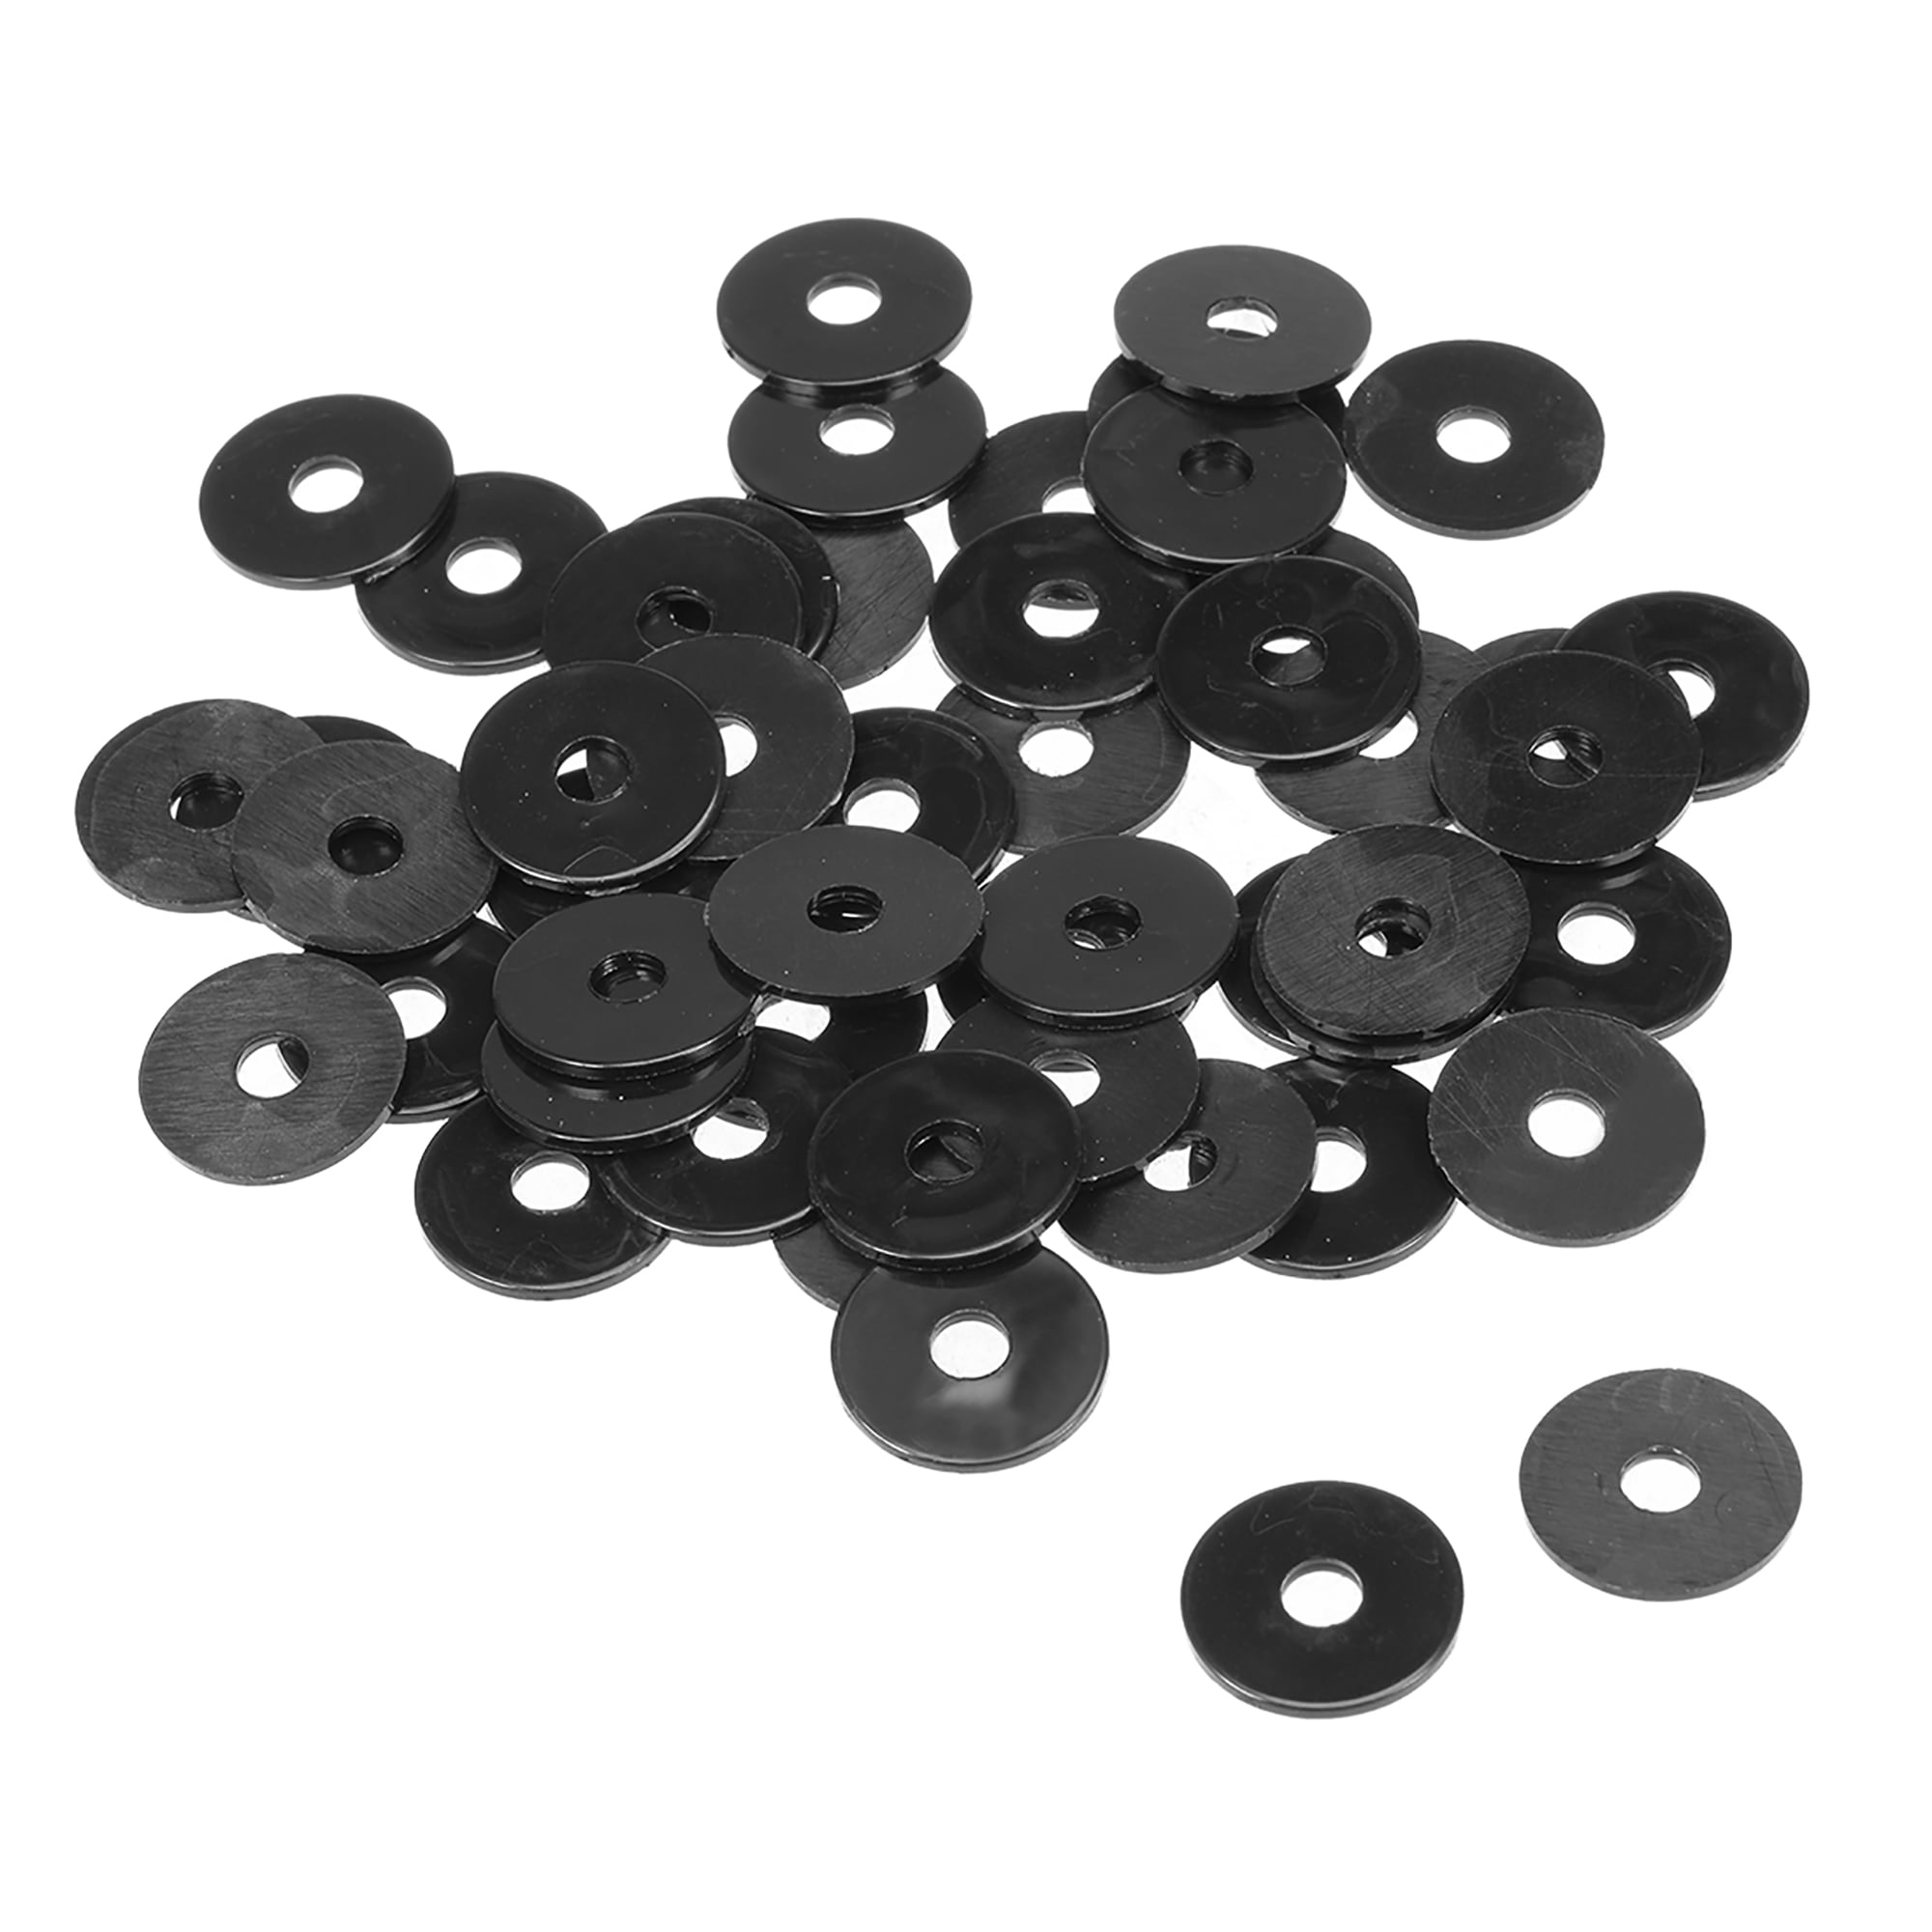 26MM O-DIAMETER 16 PACK OF 15mm RUBBER STANDOFF WASHER M8 8MM HOLE 